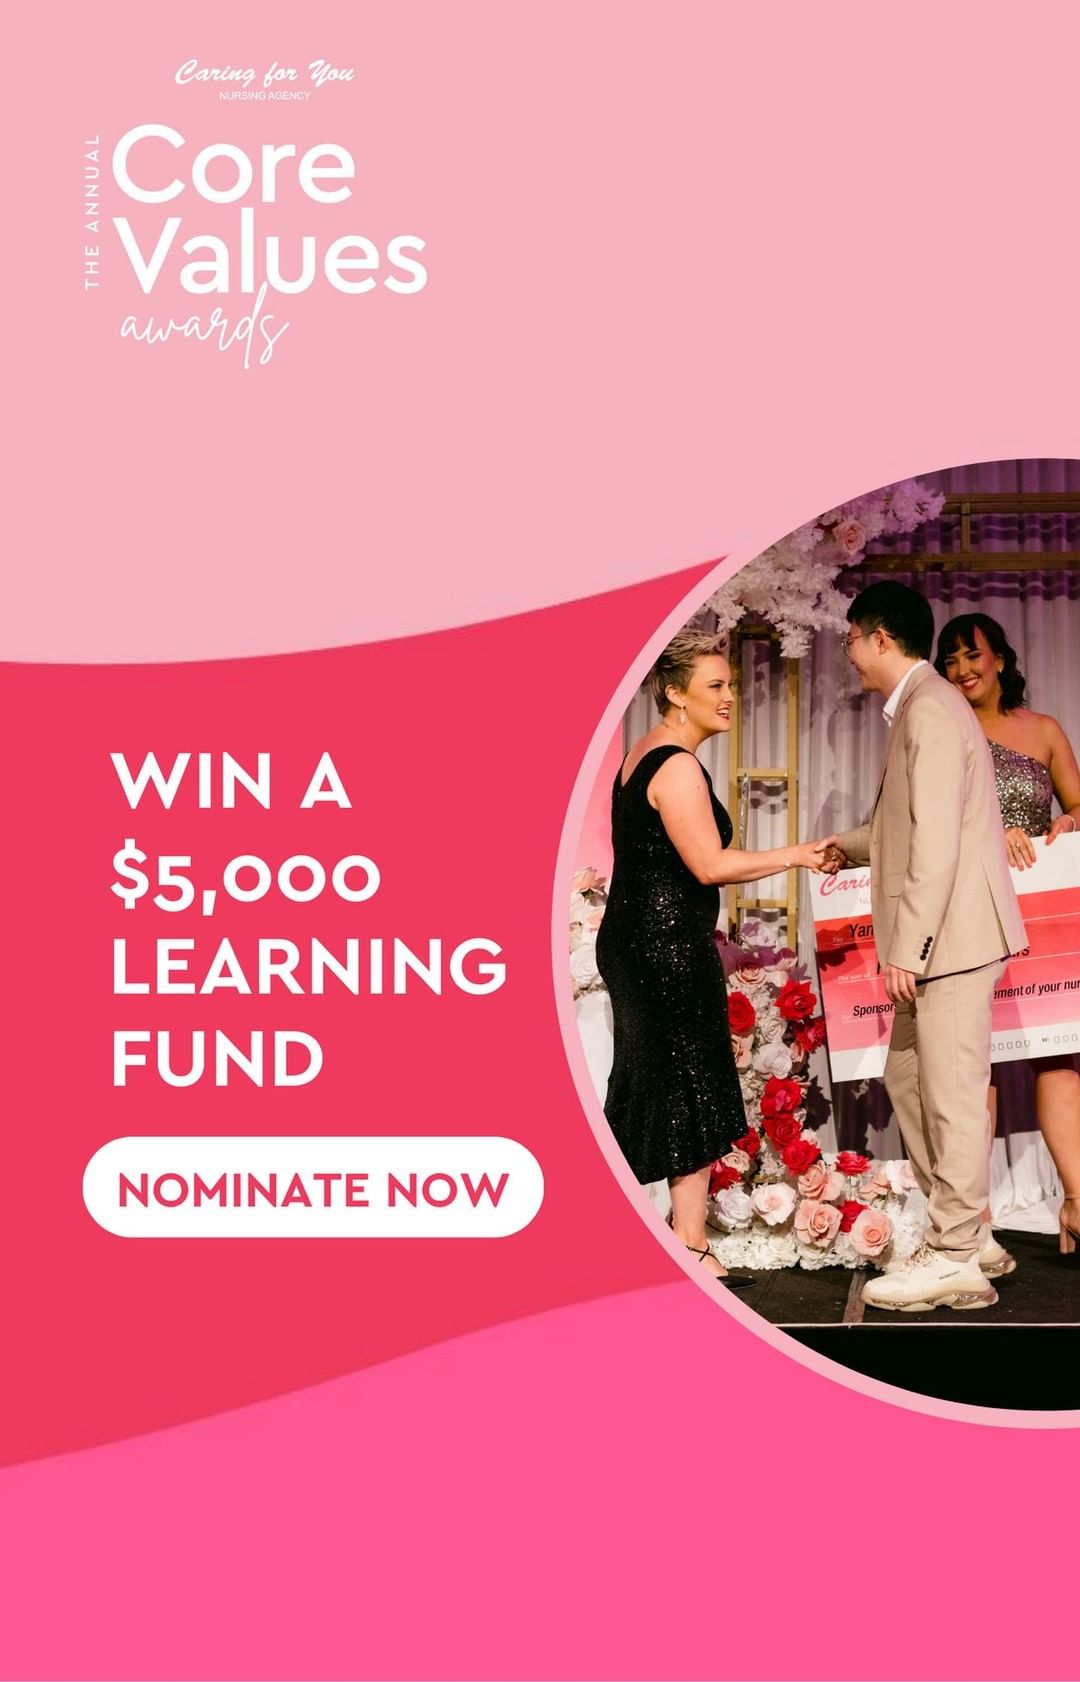 NOMINATIONS ARE OPEN FOR THE TONY MILLER AWARD - WIN A $5,000 LEARNING FUND 🤩🏆C4U Members, the Tony Miller Award provi...